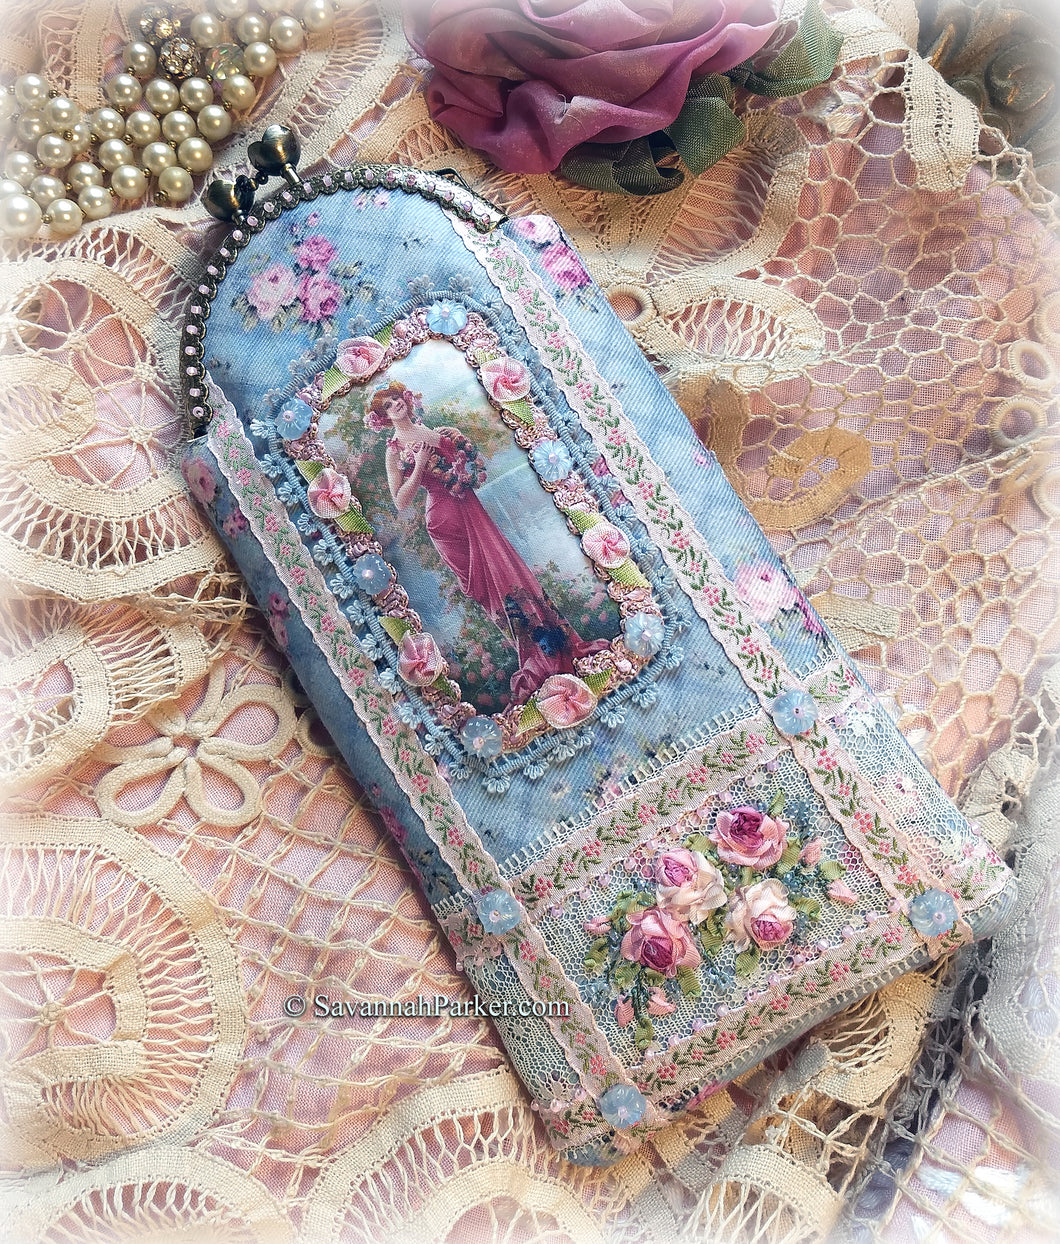 SOLD OUT Antique Style Handmade Victorian Ribbonwork Roses Phone Case Eyeglass Case Pouch, Silk Ribbon Embroidery Purse, Cell Case, Glasses Case